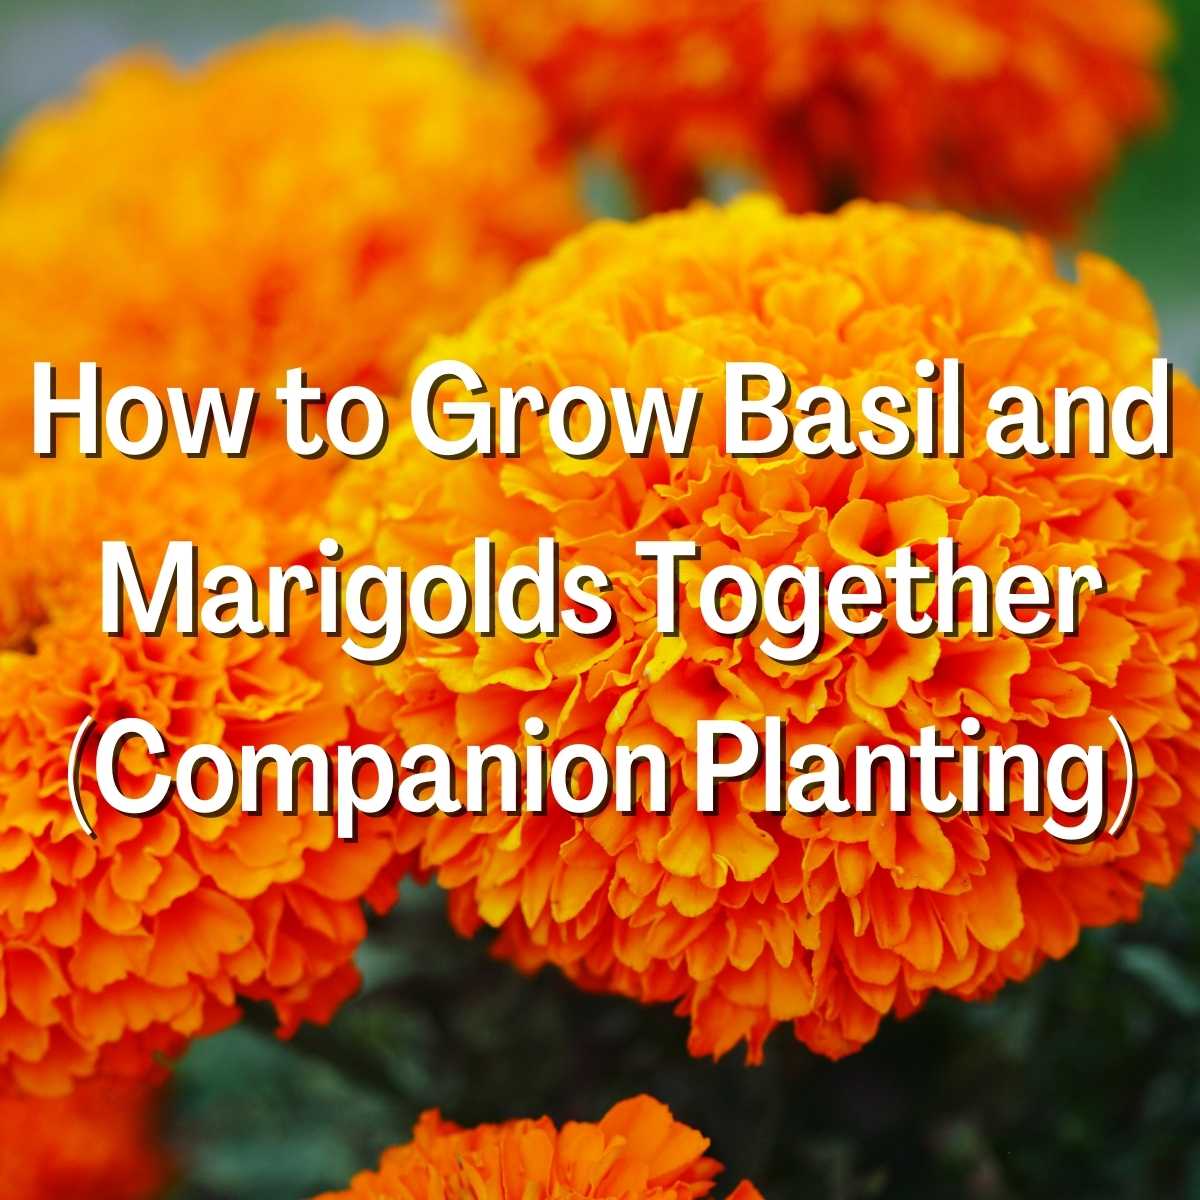 How to Grow Basil and Marigolds Together